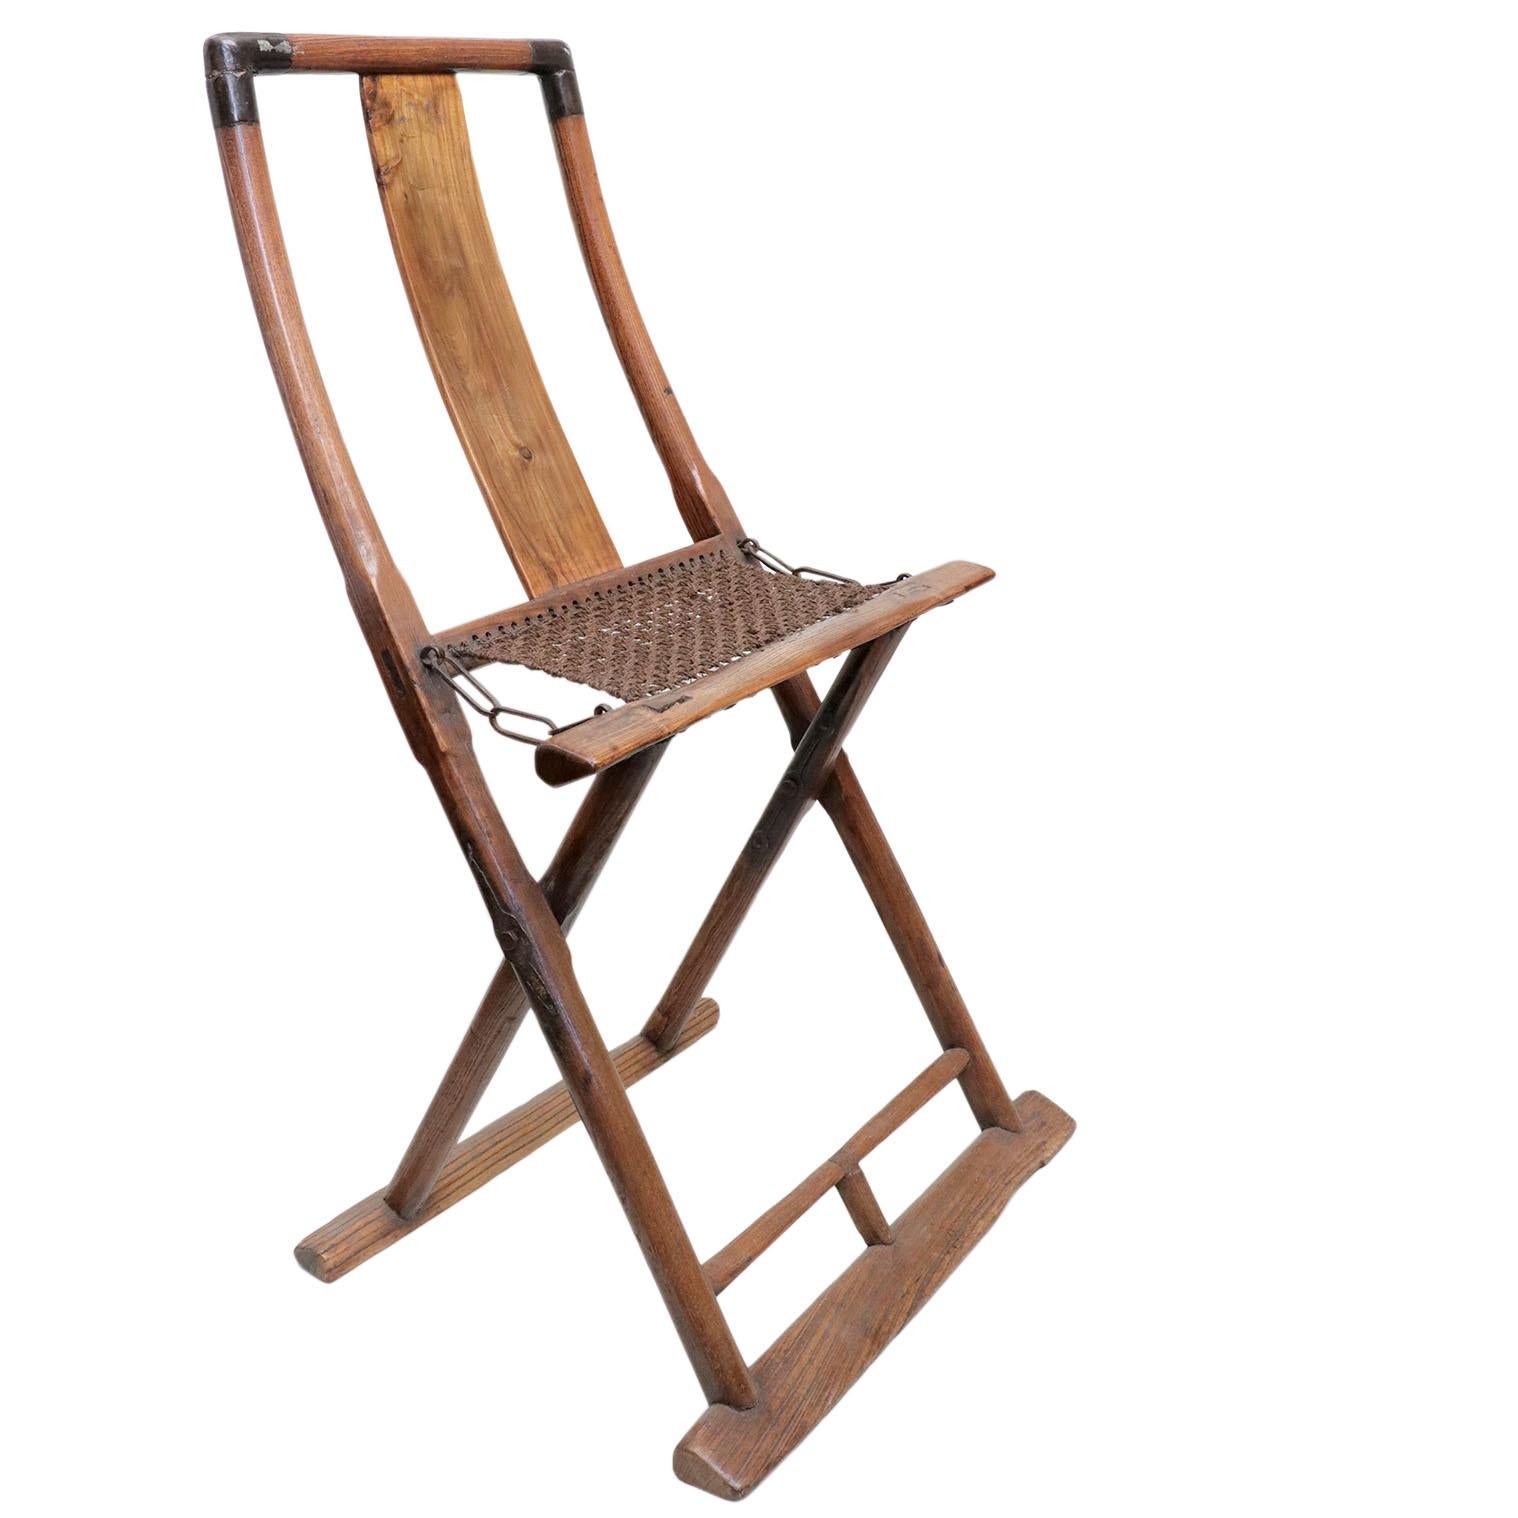 Chinese wooden folding chair with a seat area of 16